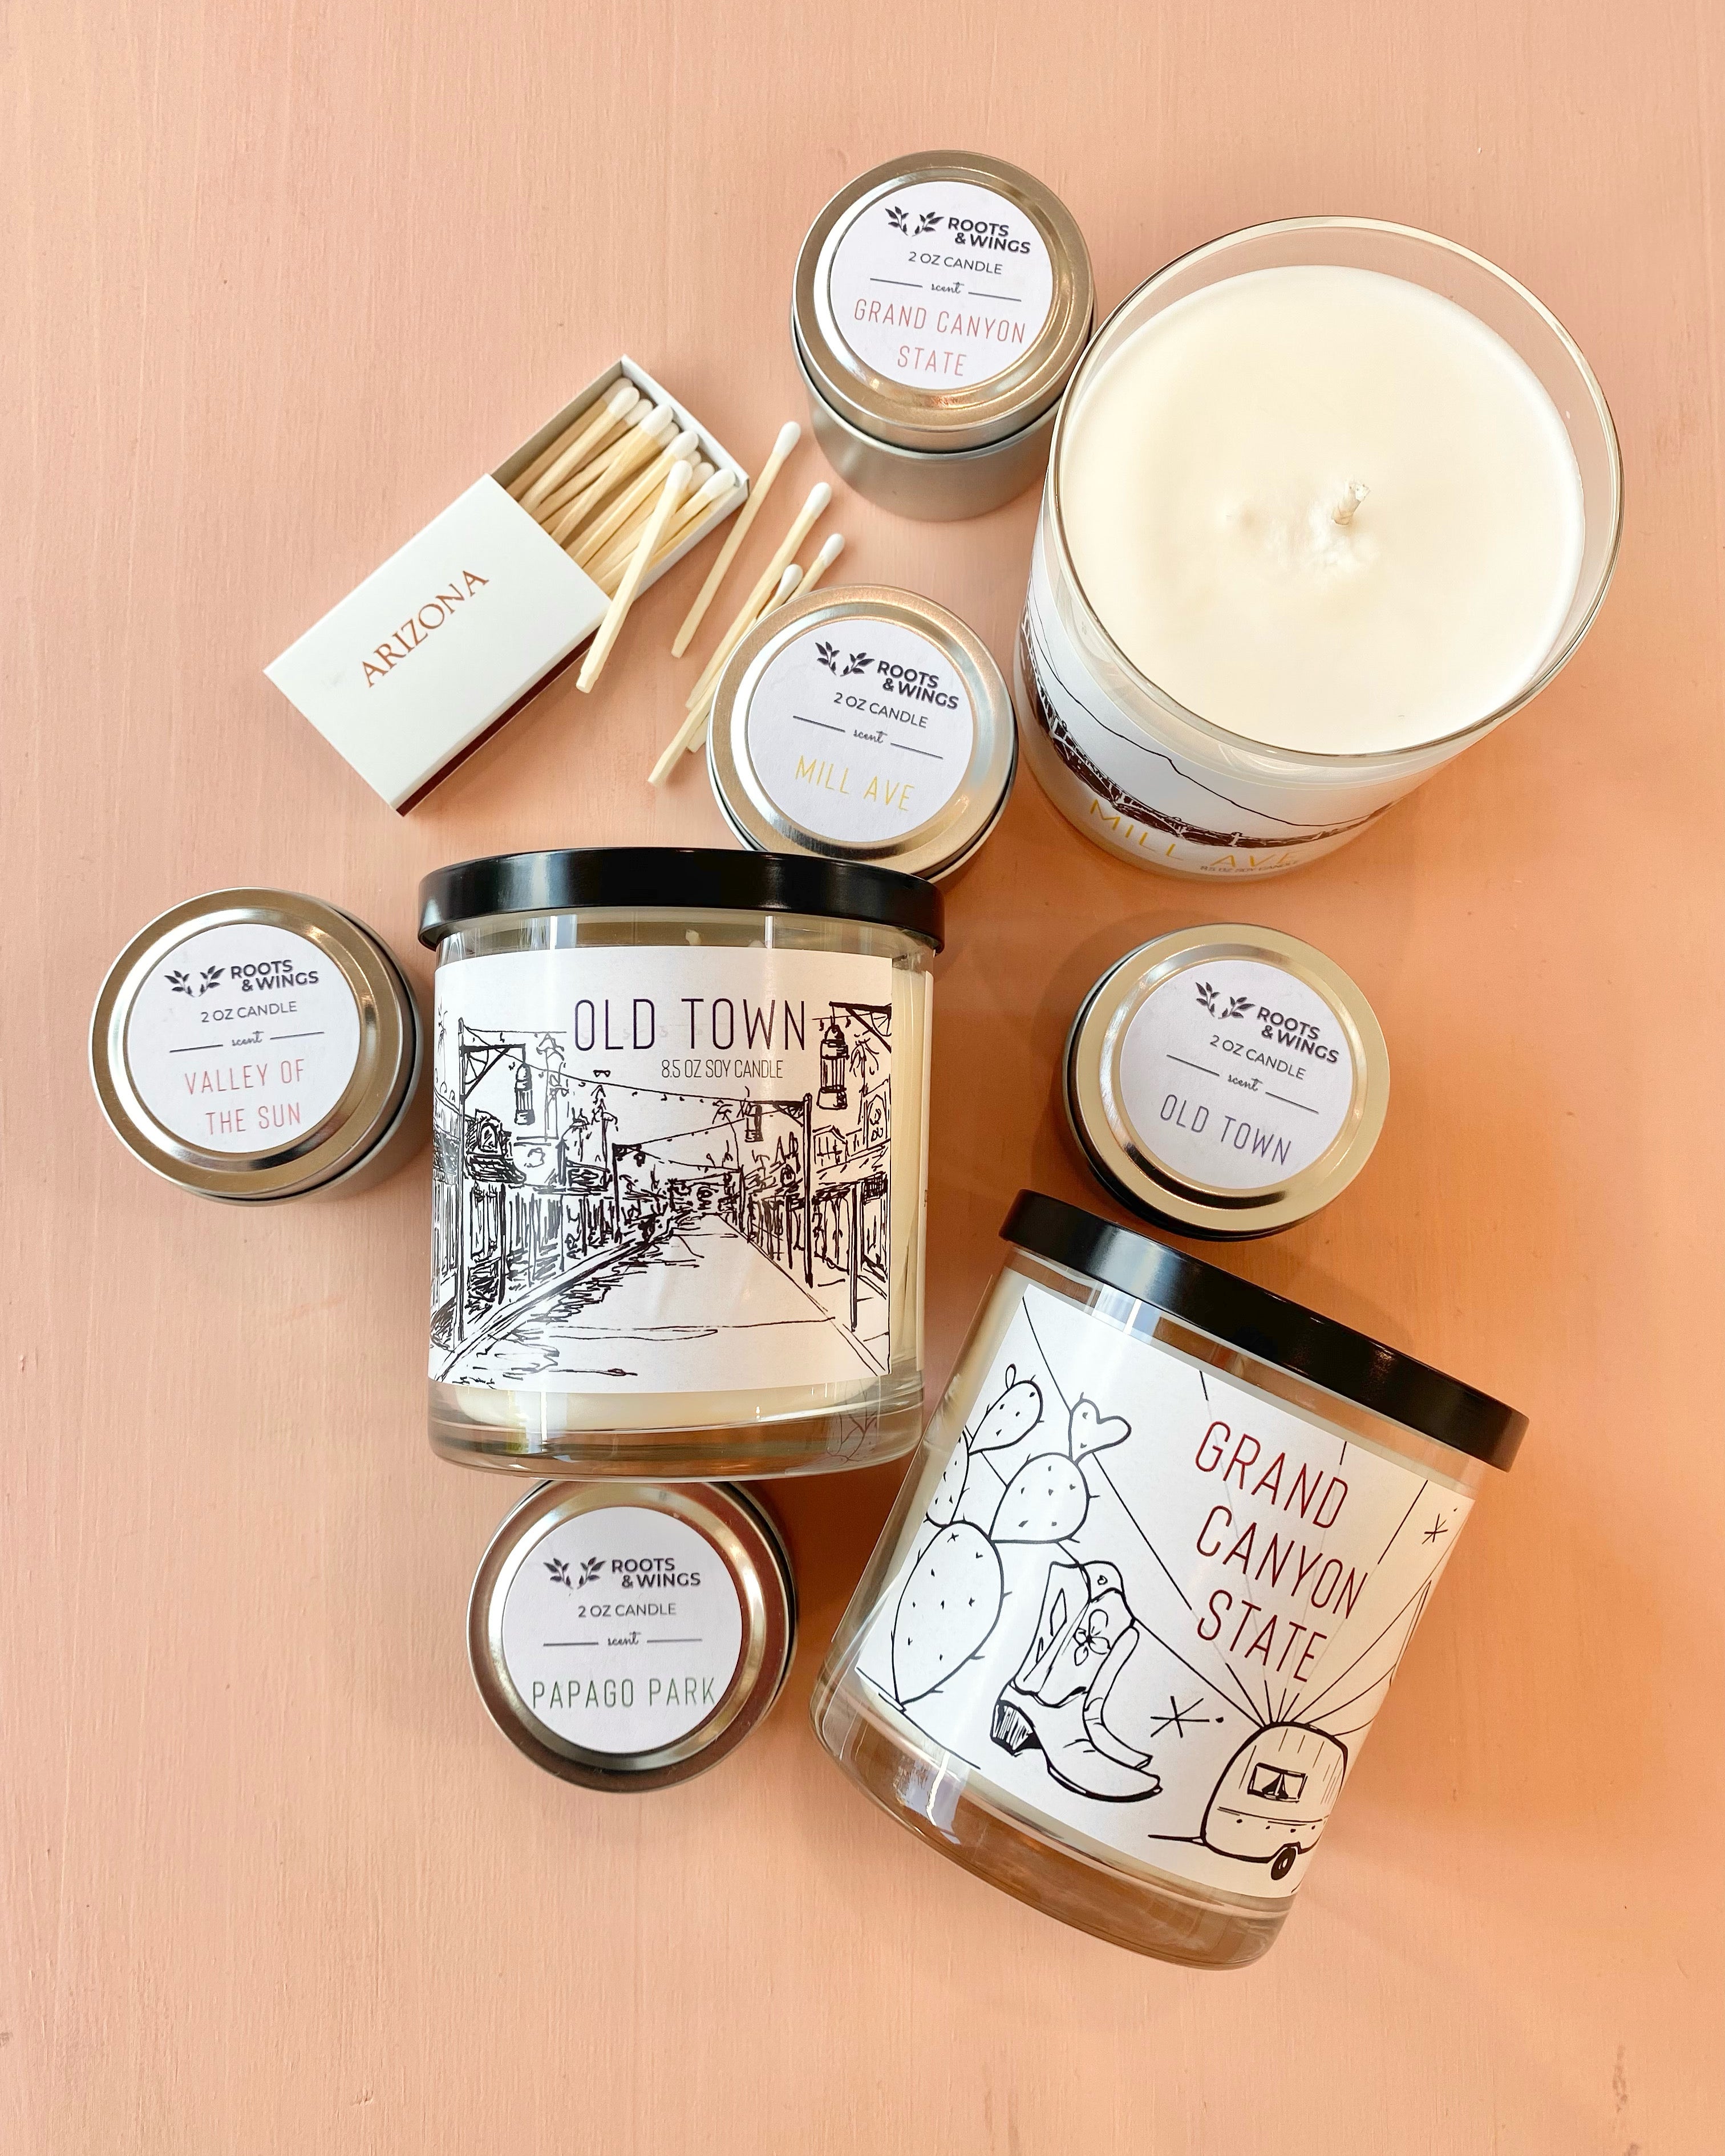 Grand Canyon State Soy Candle